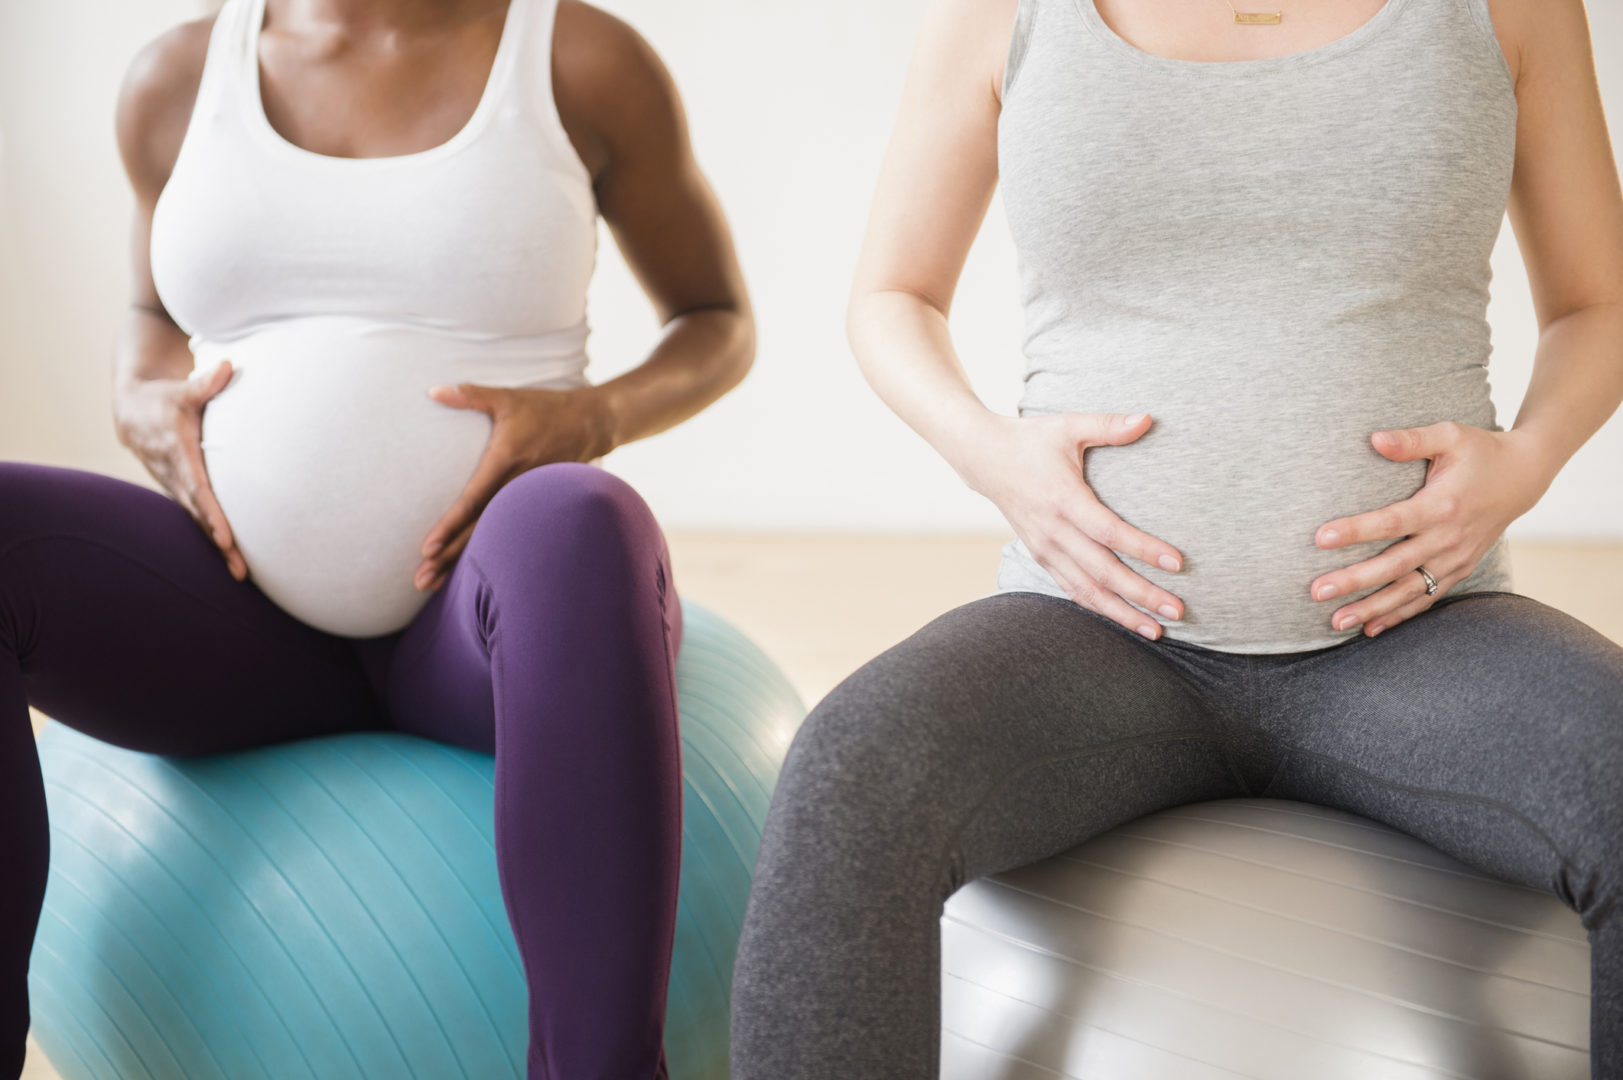 How a birthing ball can help during pregnancy, labor and beyond